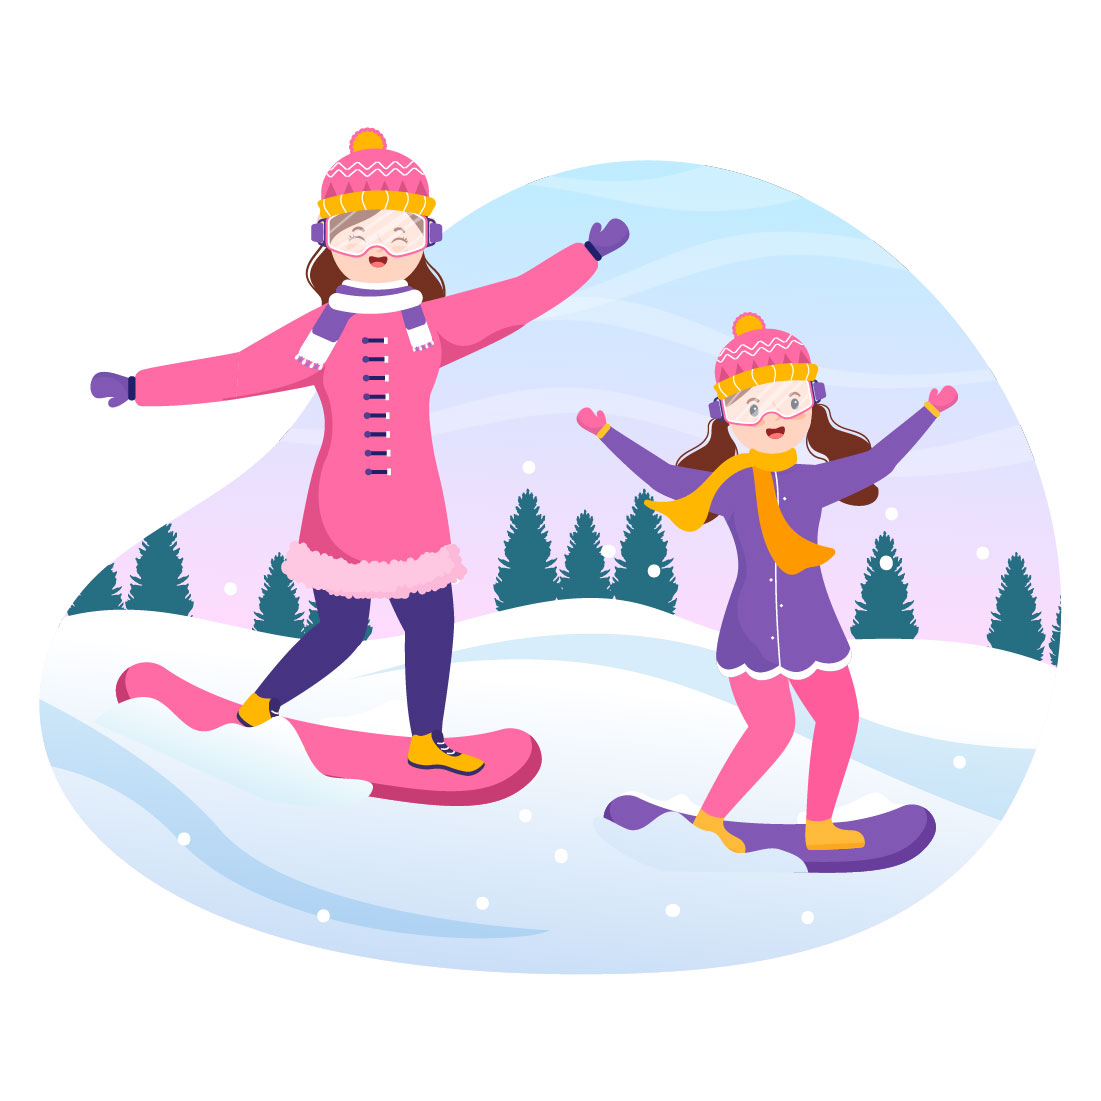 13 Snowboarding Activity Illustration Preview Image.